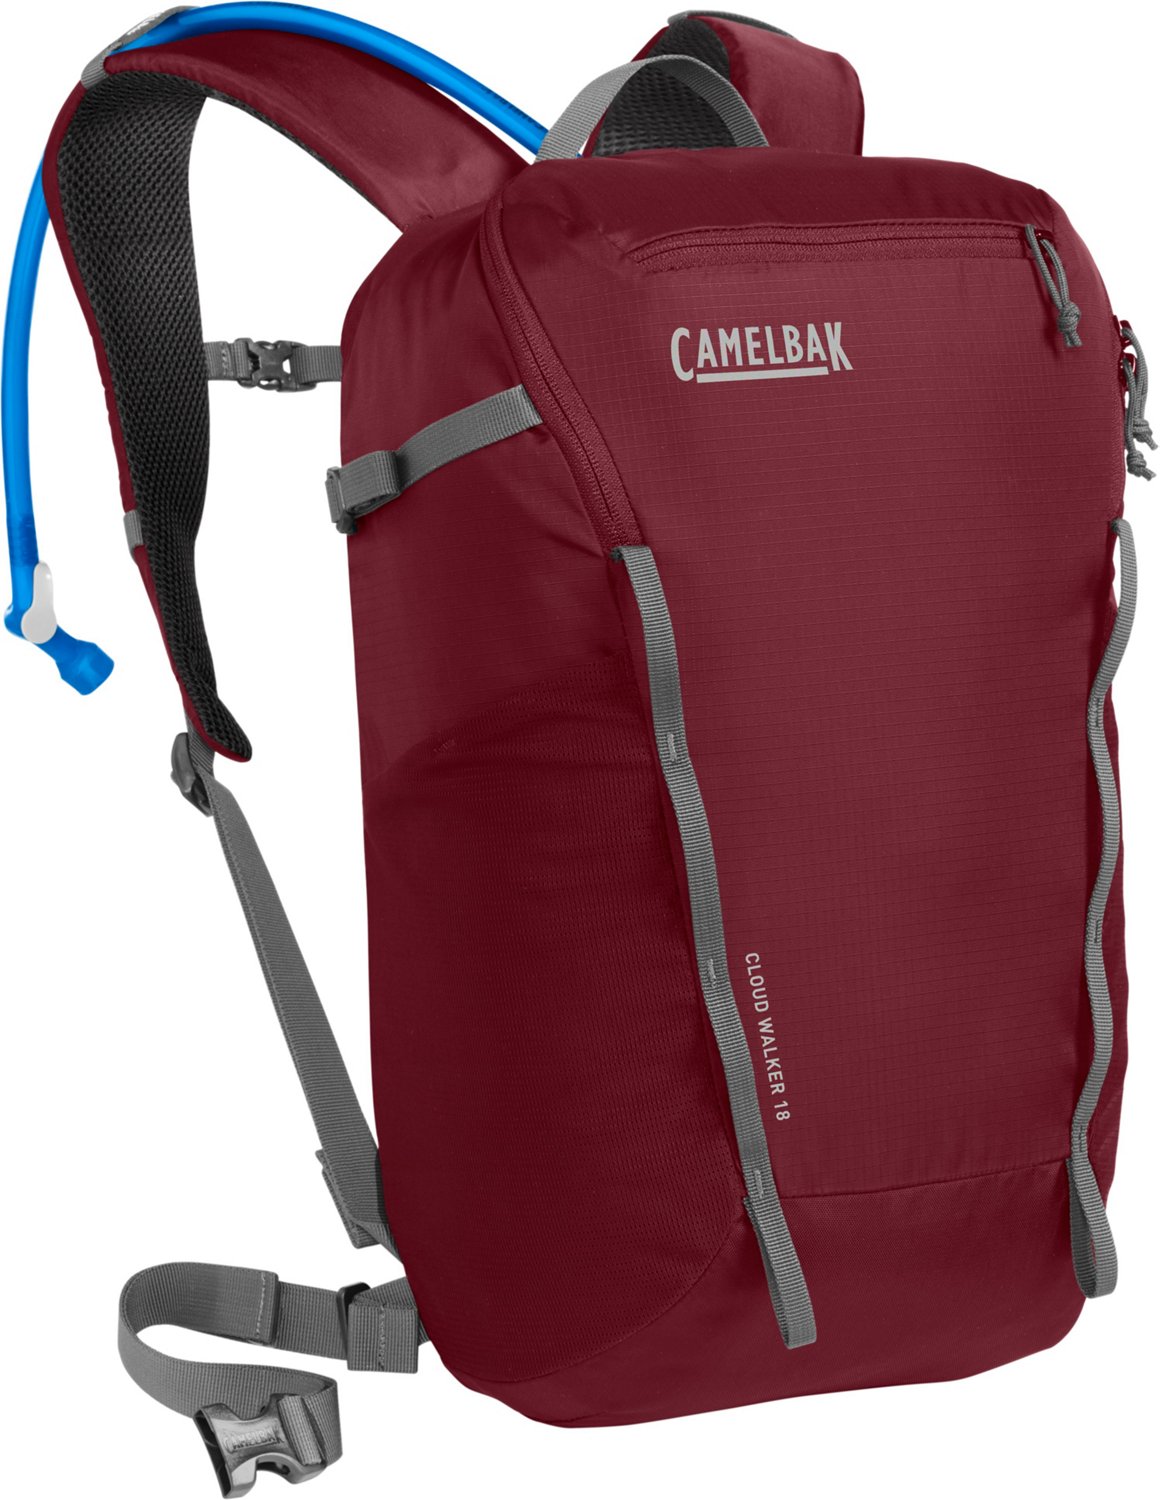 CamelBak Cloud Walker 18 Hydration Pack                                                                                          - view number 1 selected